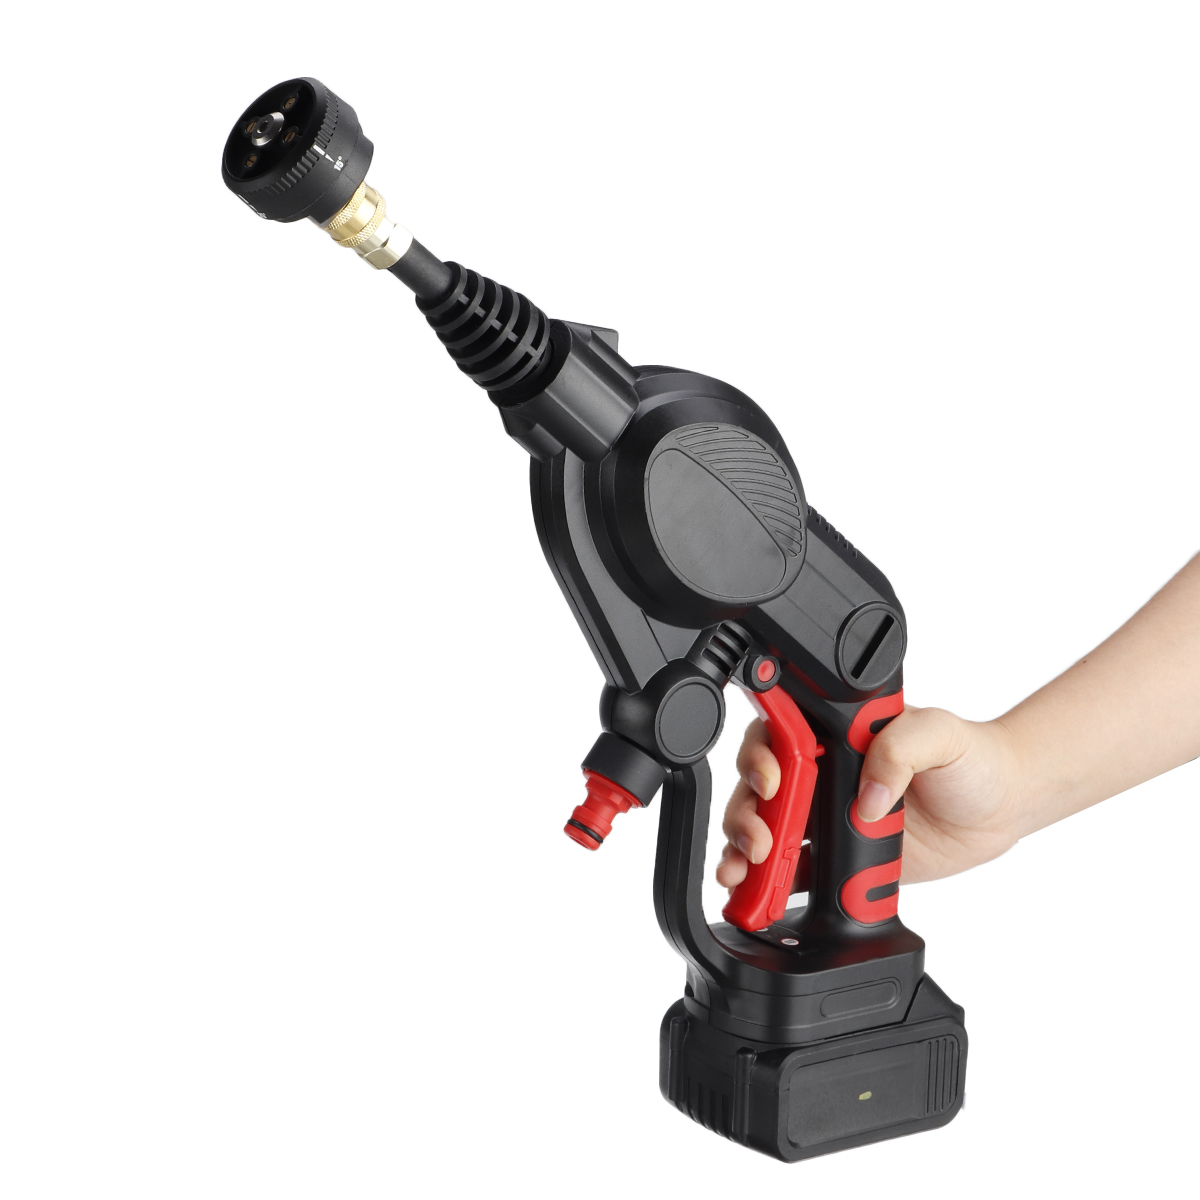 21V-Multifunctional-Cordless-Pressure-Cleaner-Washer-Sprayer-Water-Hose-Nozzle-Pump-with-Battery-1292573-10